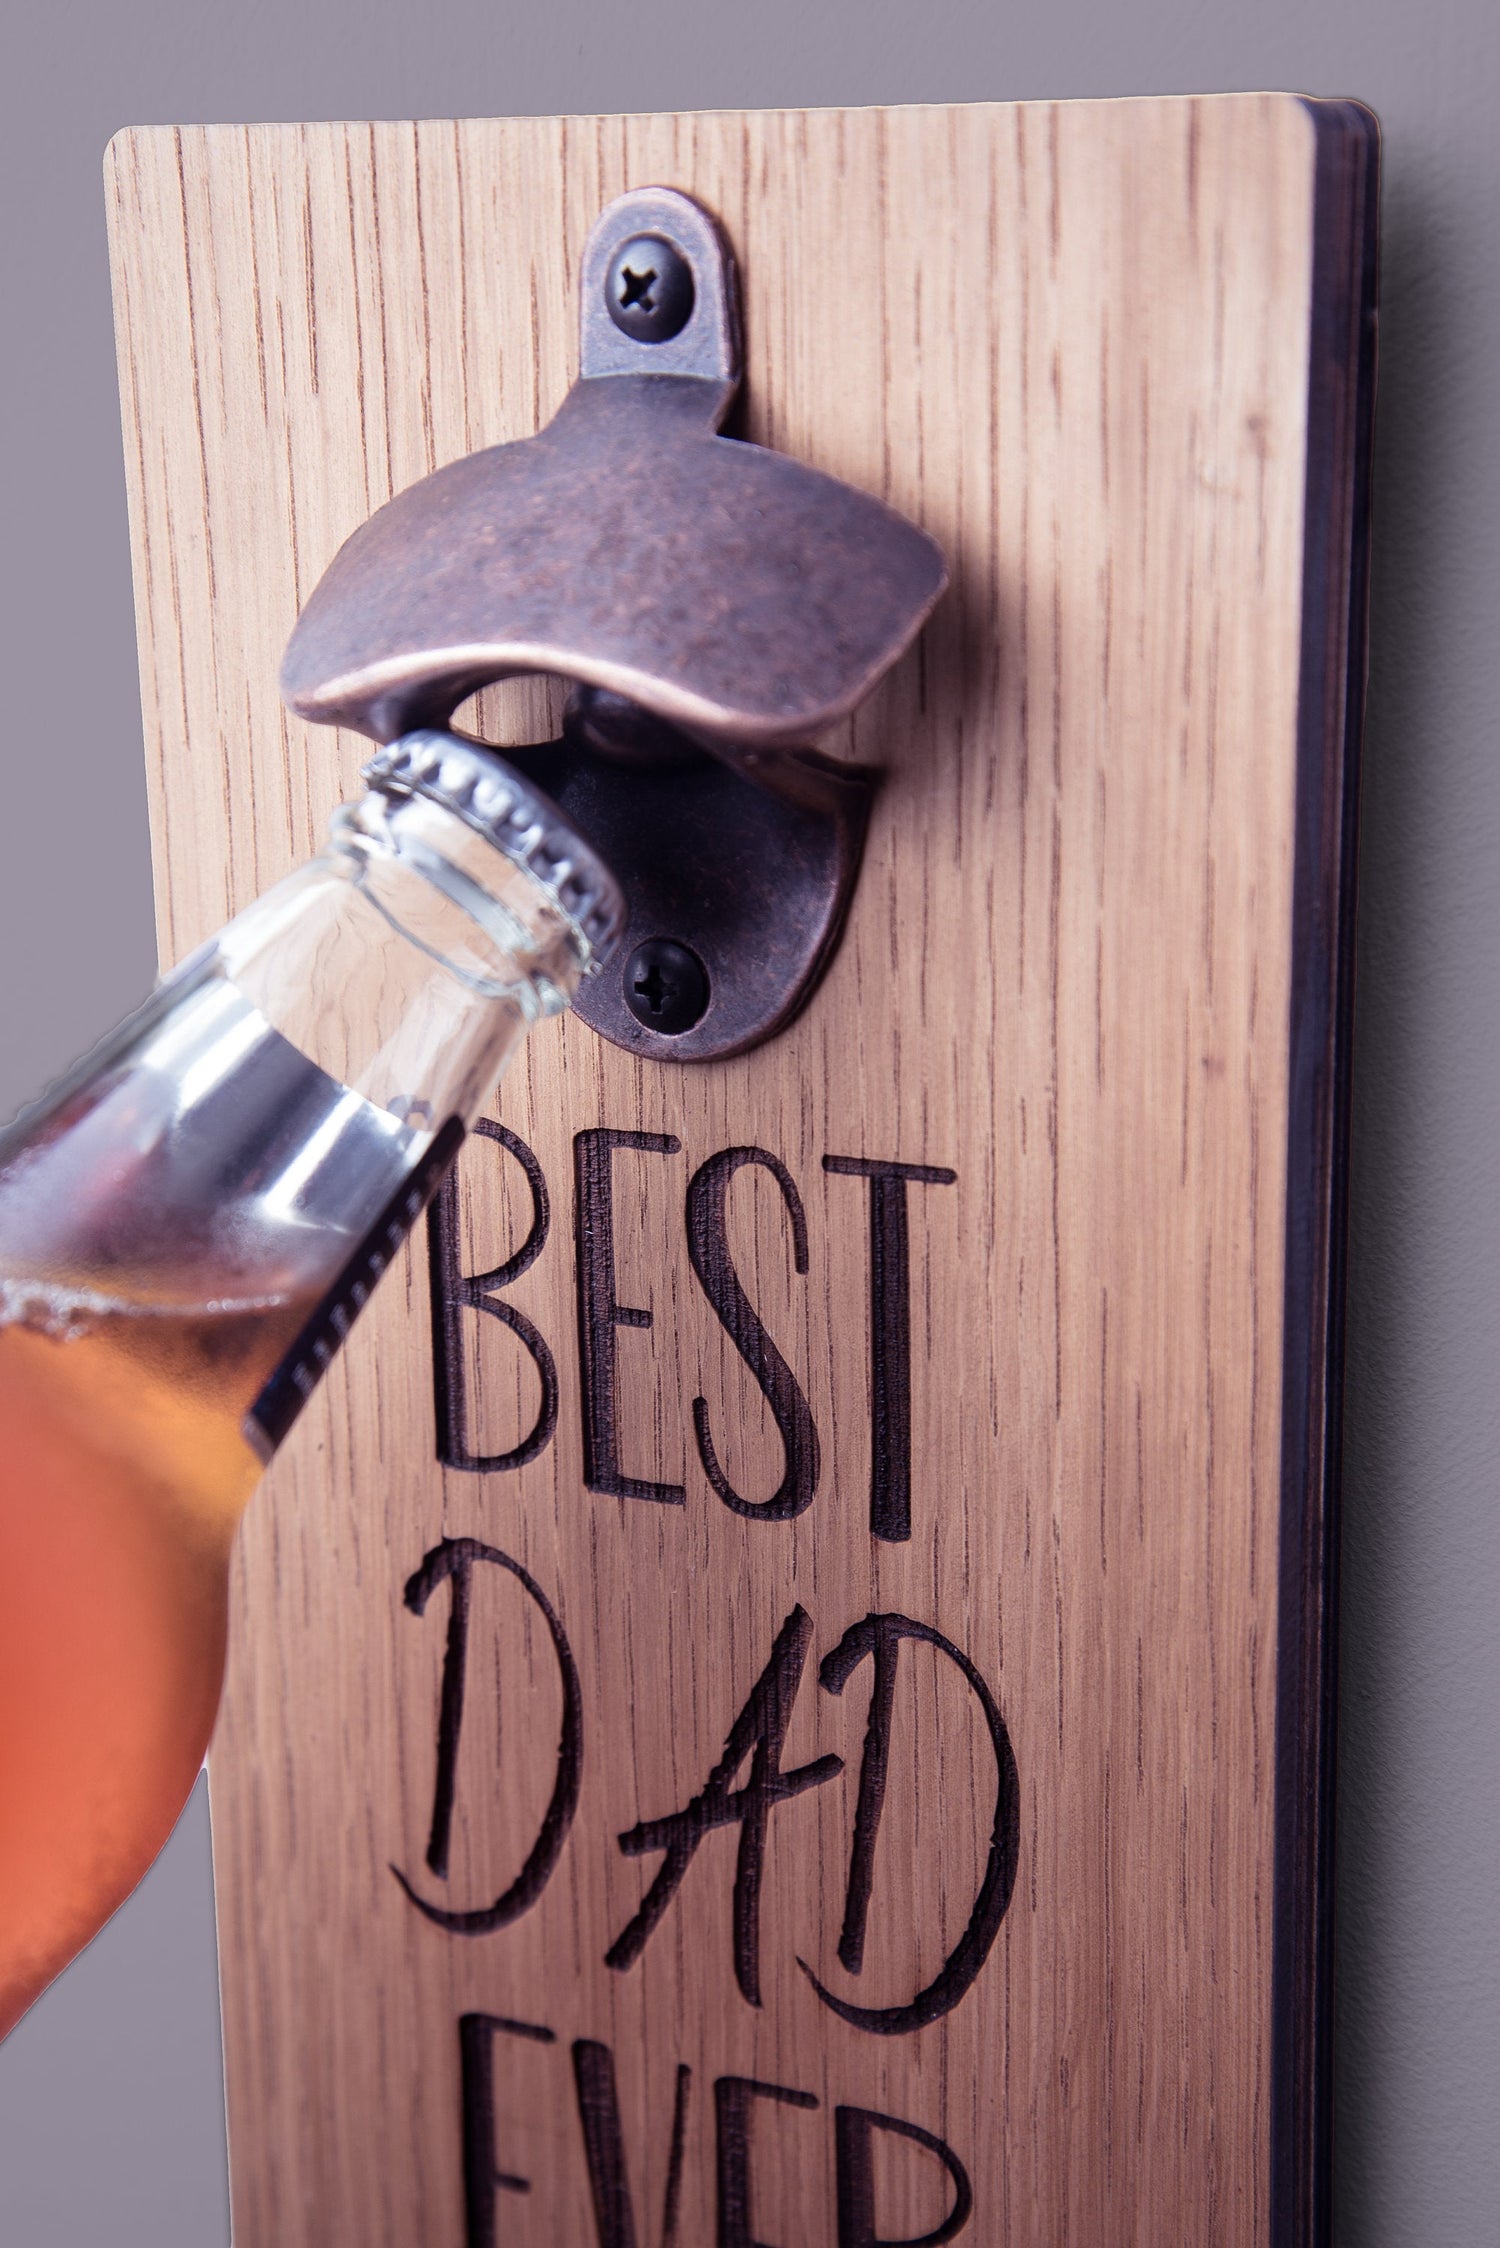 Best Dad Ever Bottle Opener | Fathers Day Gift Idea | Gift For Dad | Birthday Gift For Dad | Birthday Gift For Him | Gift For Him |